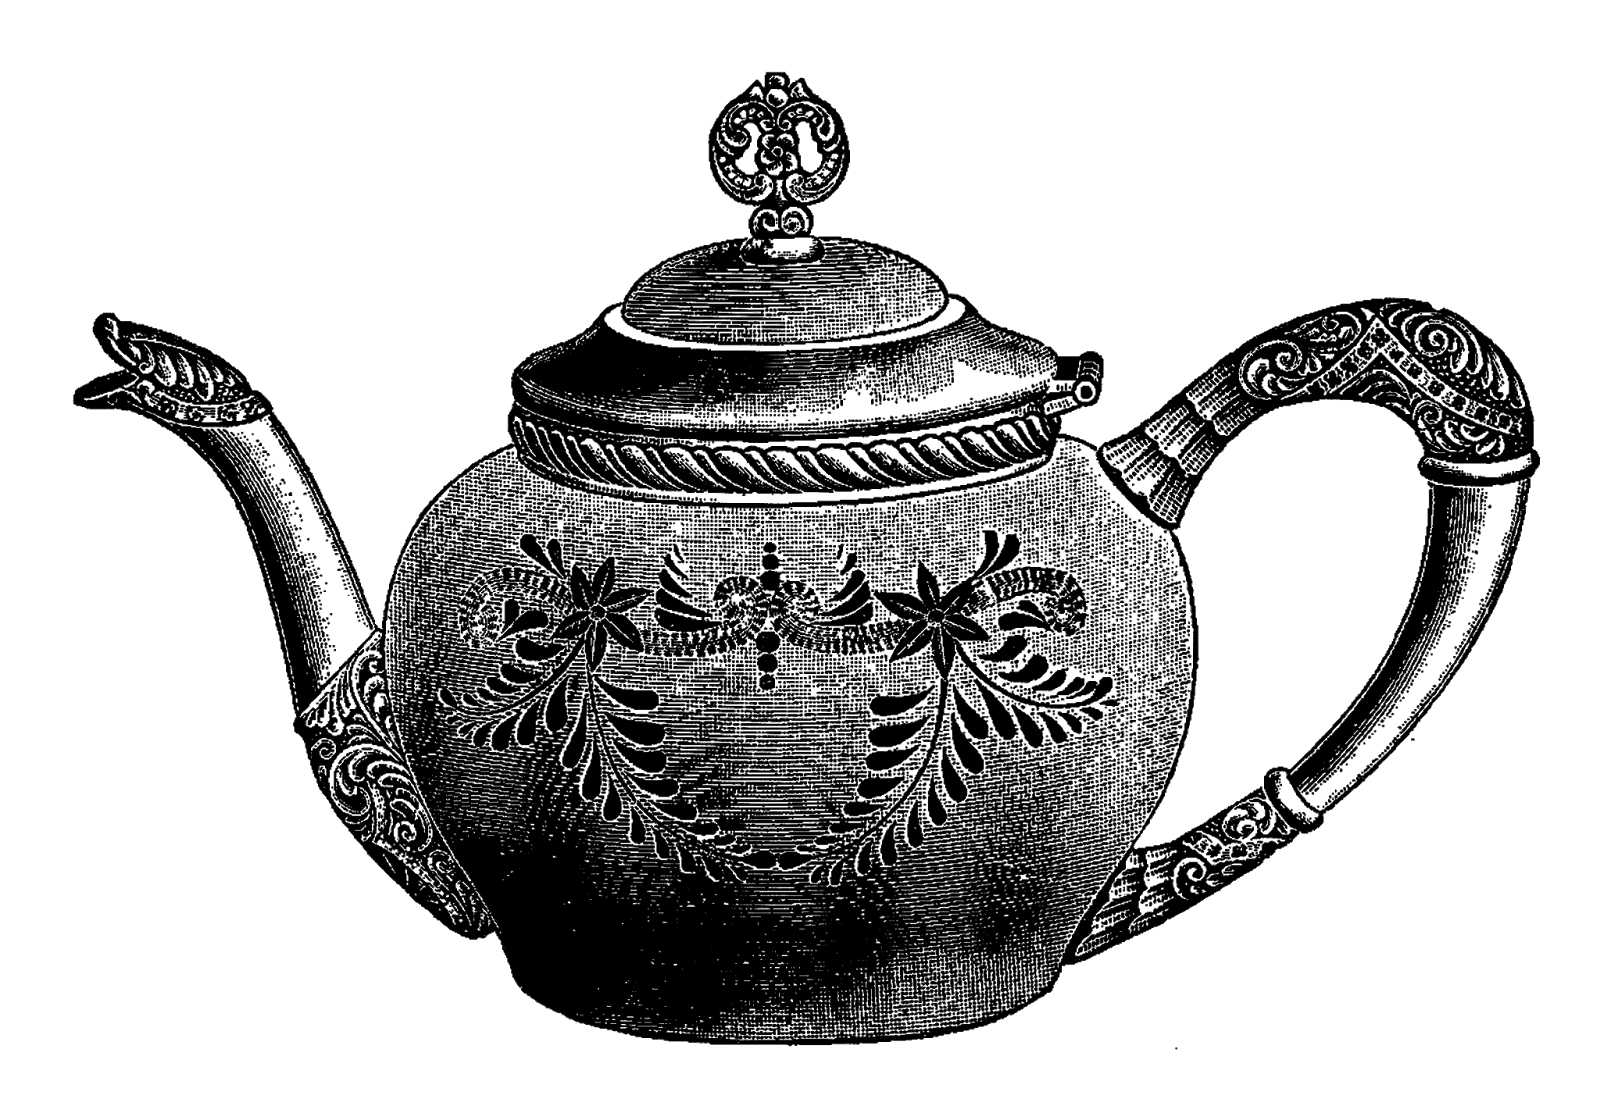 Teapot and cup clip art free vector in open office drawing svg 2 image
35801